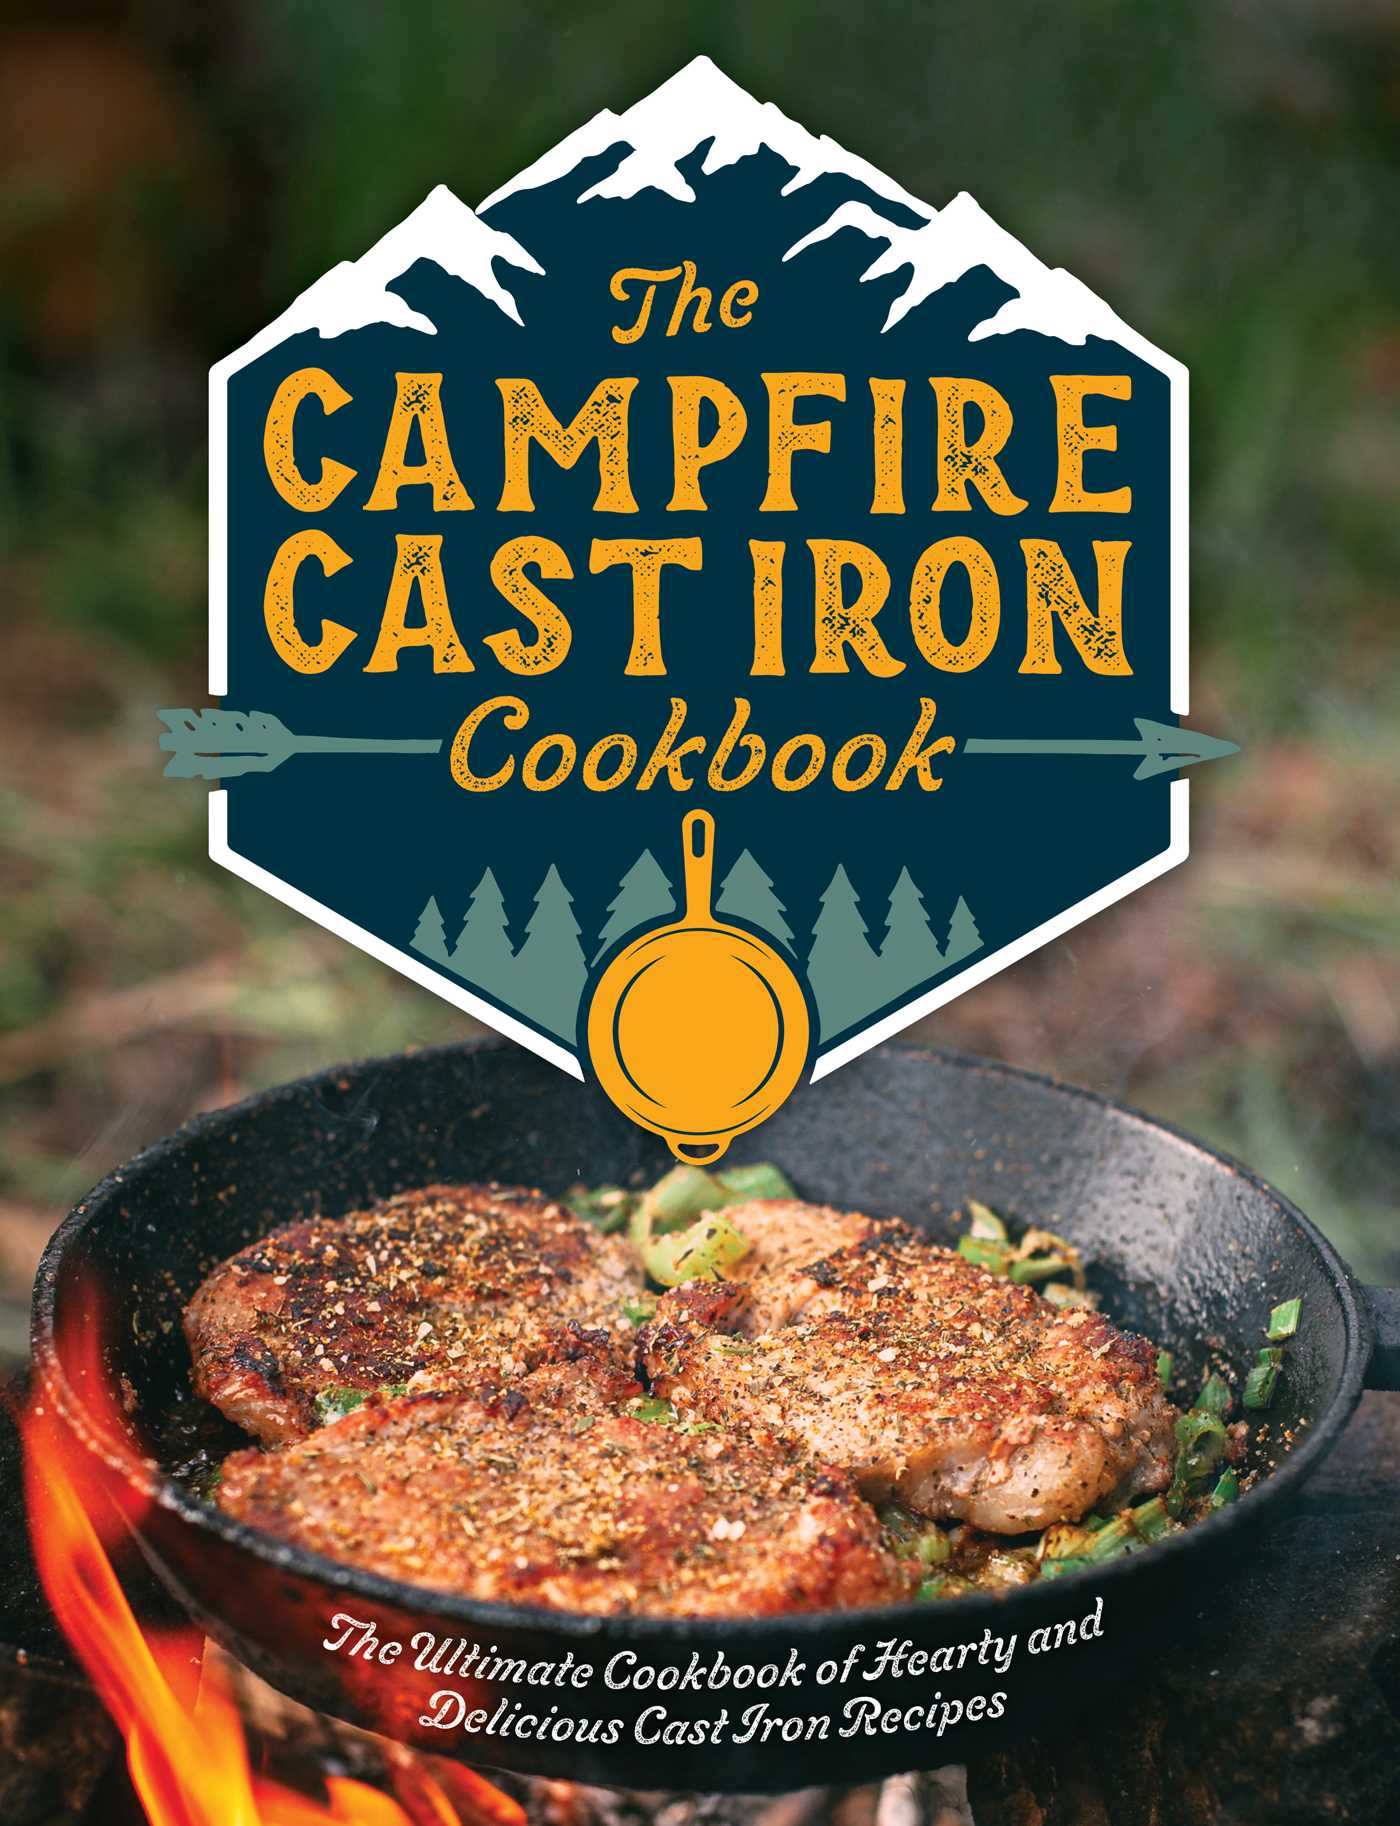 The Campfire Cast Iron Cookbook: The Ultimate Cookbook of Hearty and Delicious Cast Iron Recipes [Book]